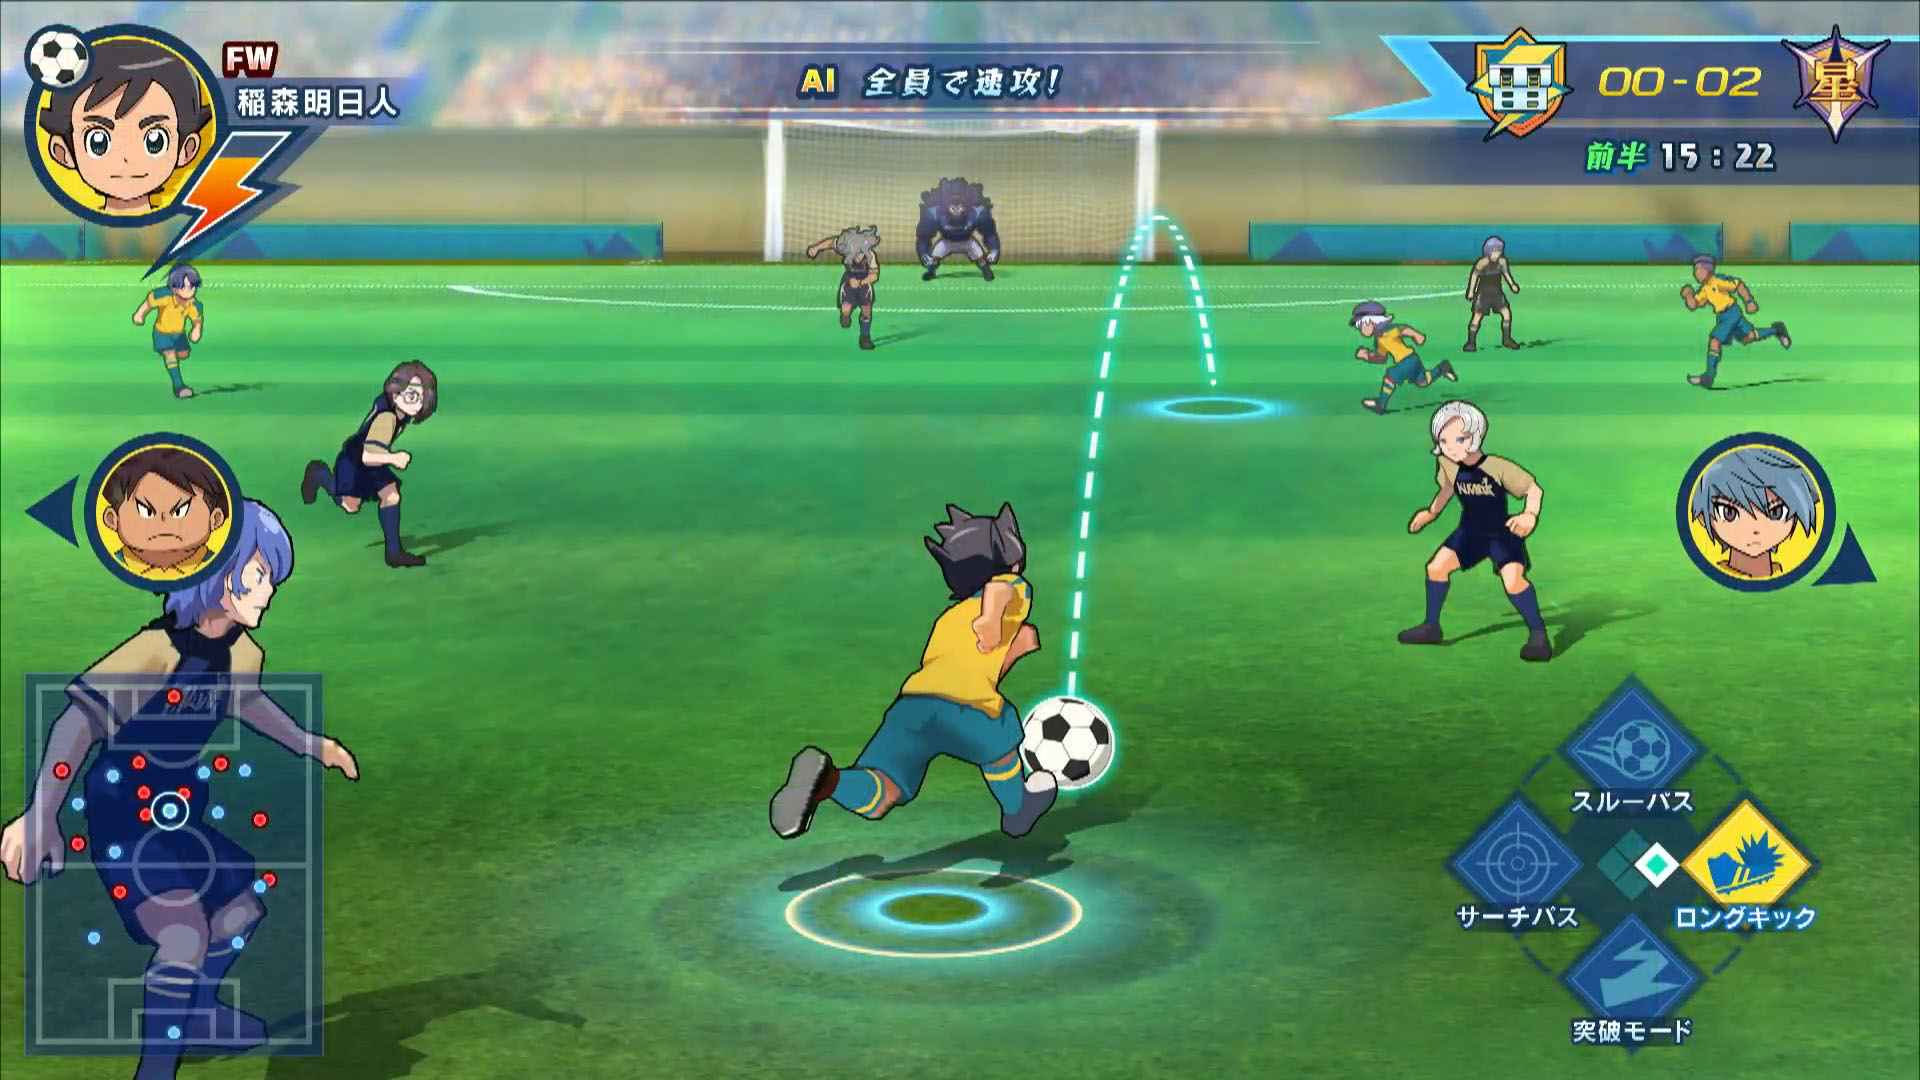 Inazuma Eleven Ares Soccer Game Kicks Off With First